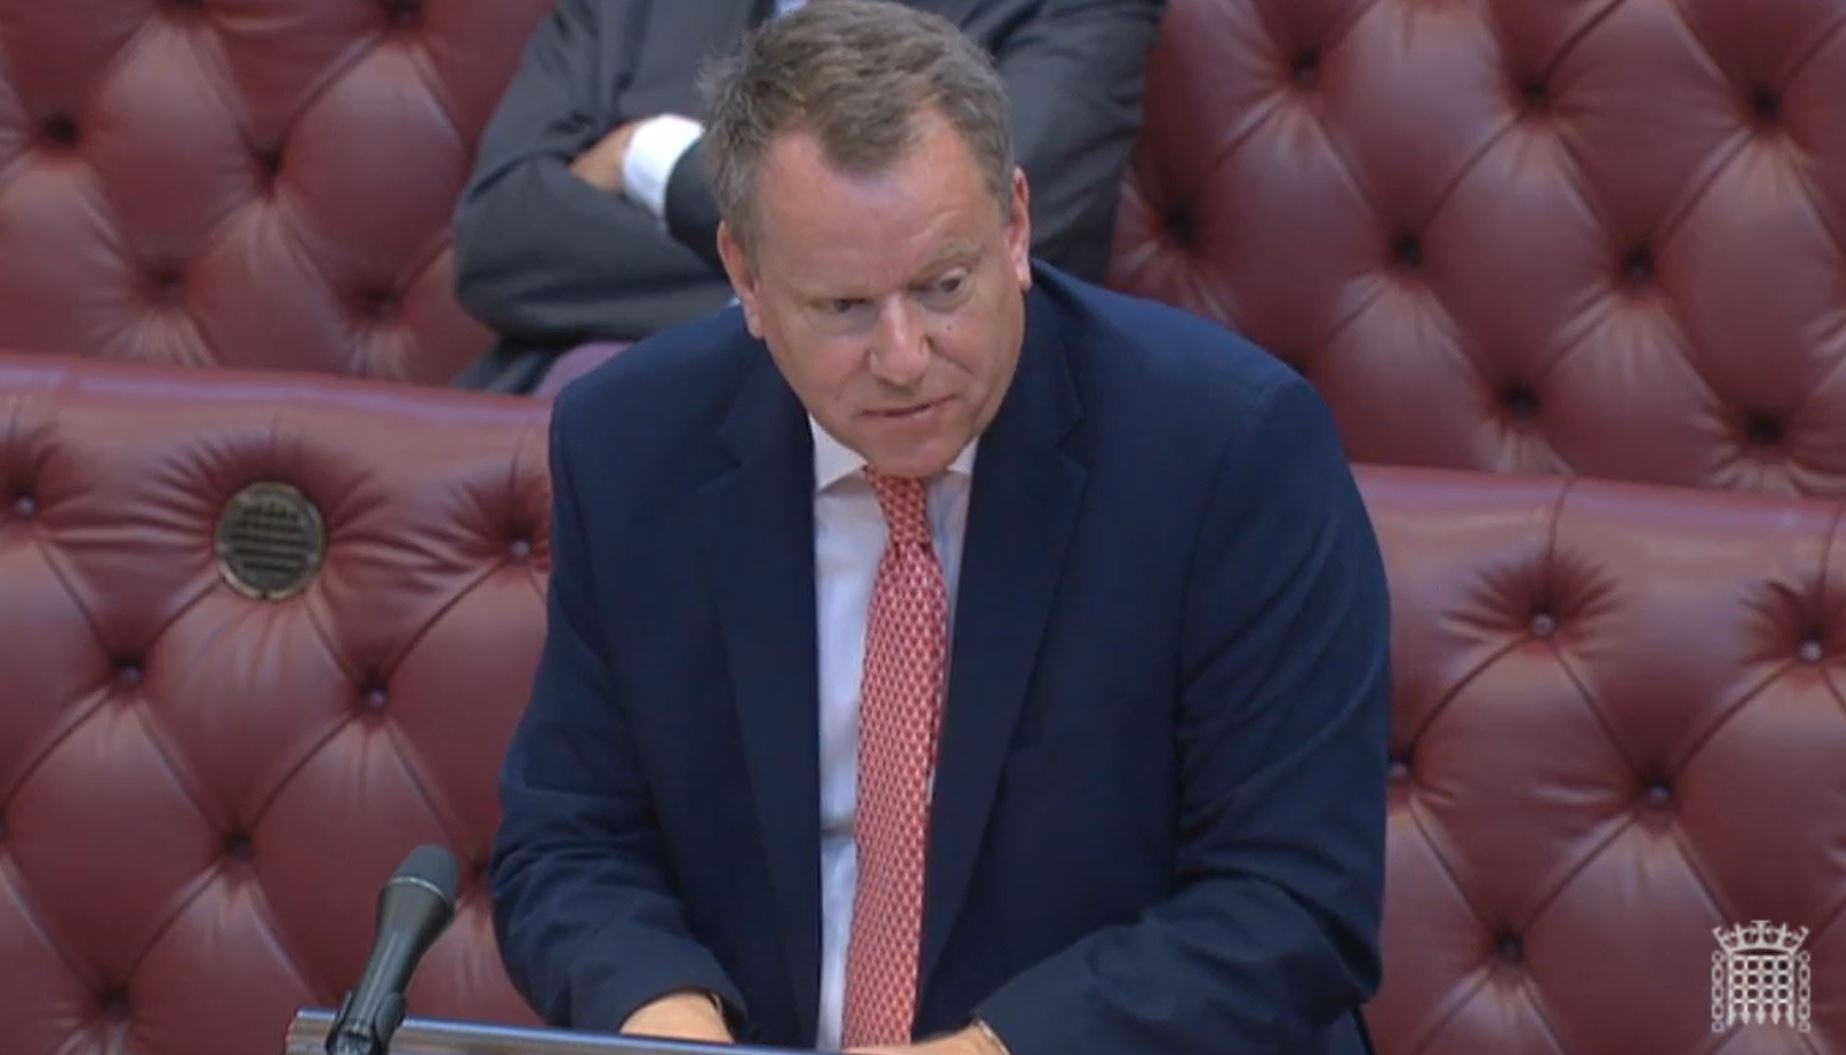 David Frost, the Brexit minister, tells the House of Lords the UK government wants to renegotiate the Northern Ireland protocol